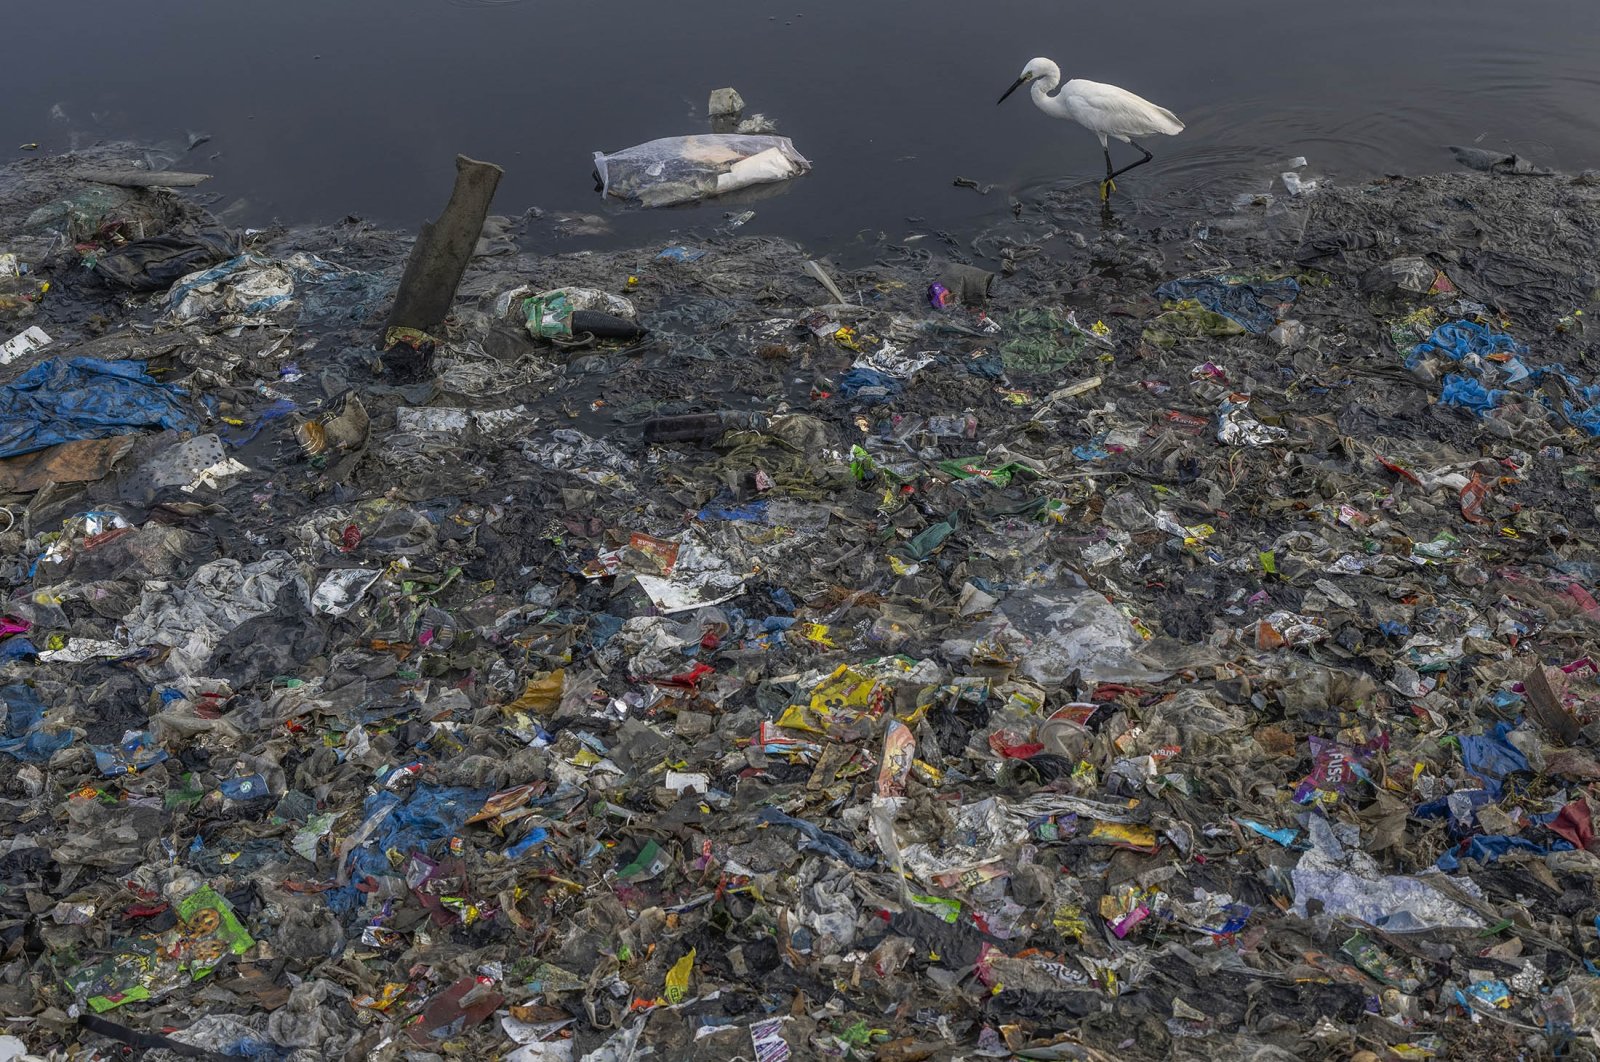 An egret looks for food amid plastic and other garbage littered on the shores of the Arabian Sea on World Environment Day, in Mumbai, India, June 5, 2022. (AP Photo)